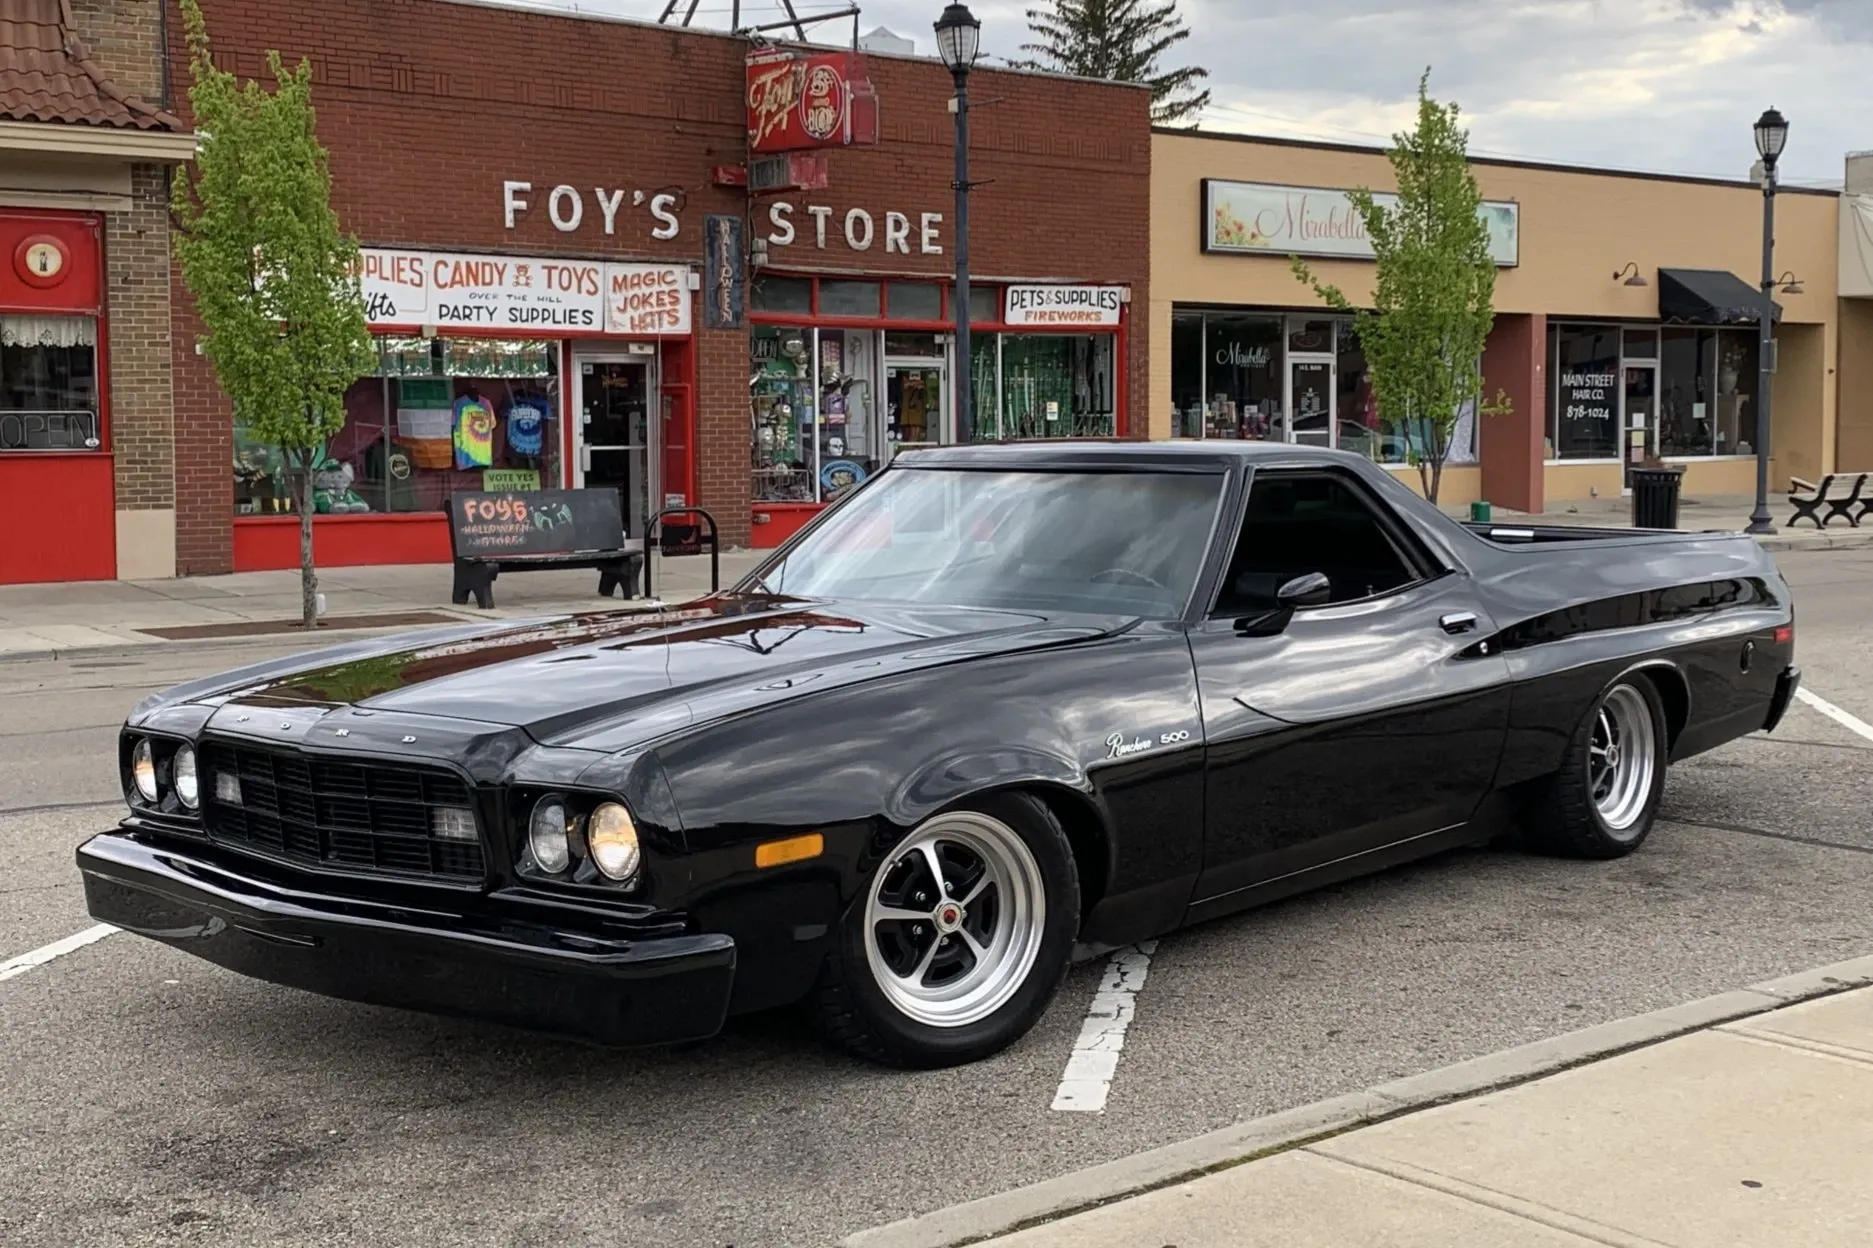 A parked black 1973 Ford Ranchero 500